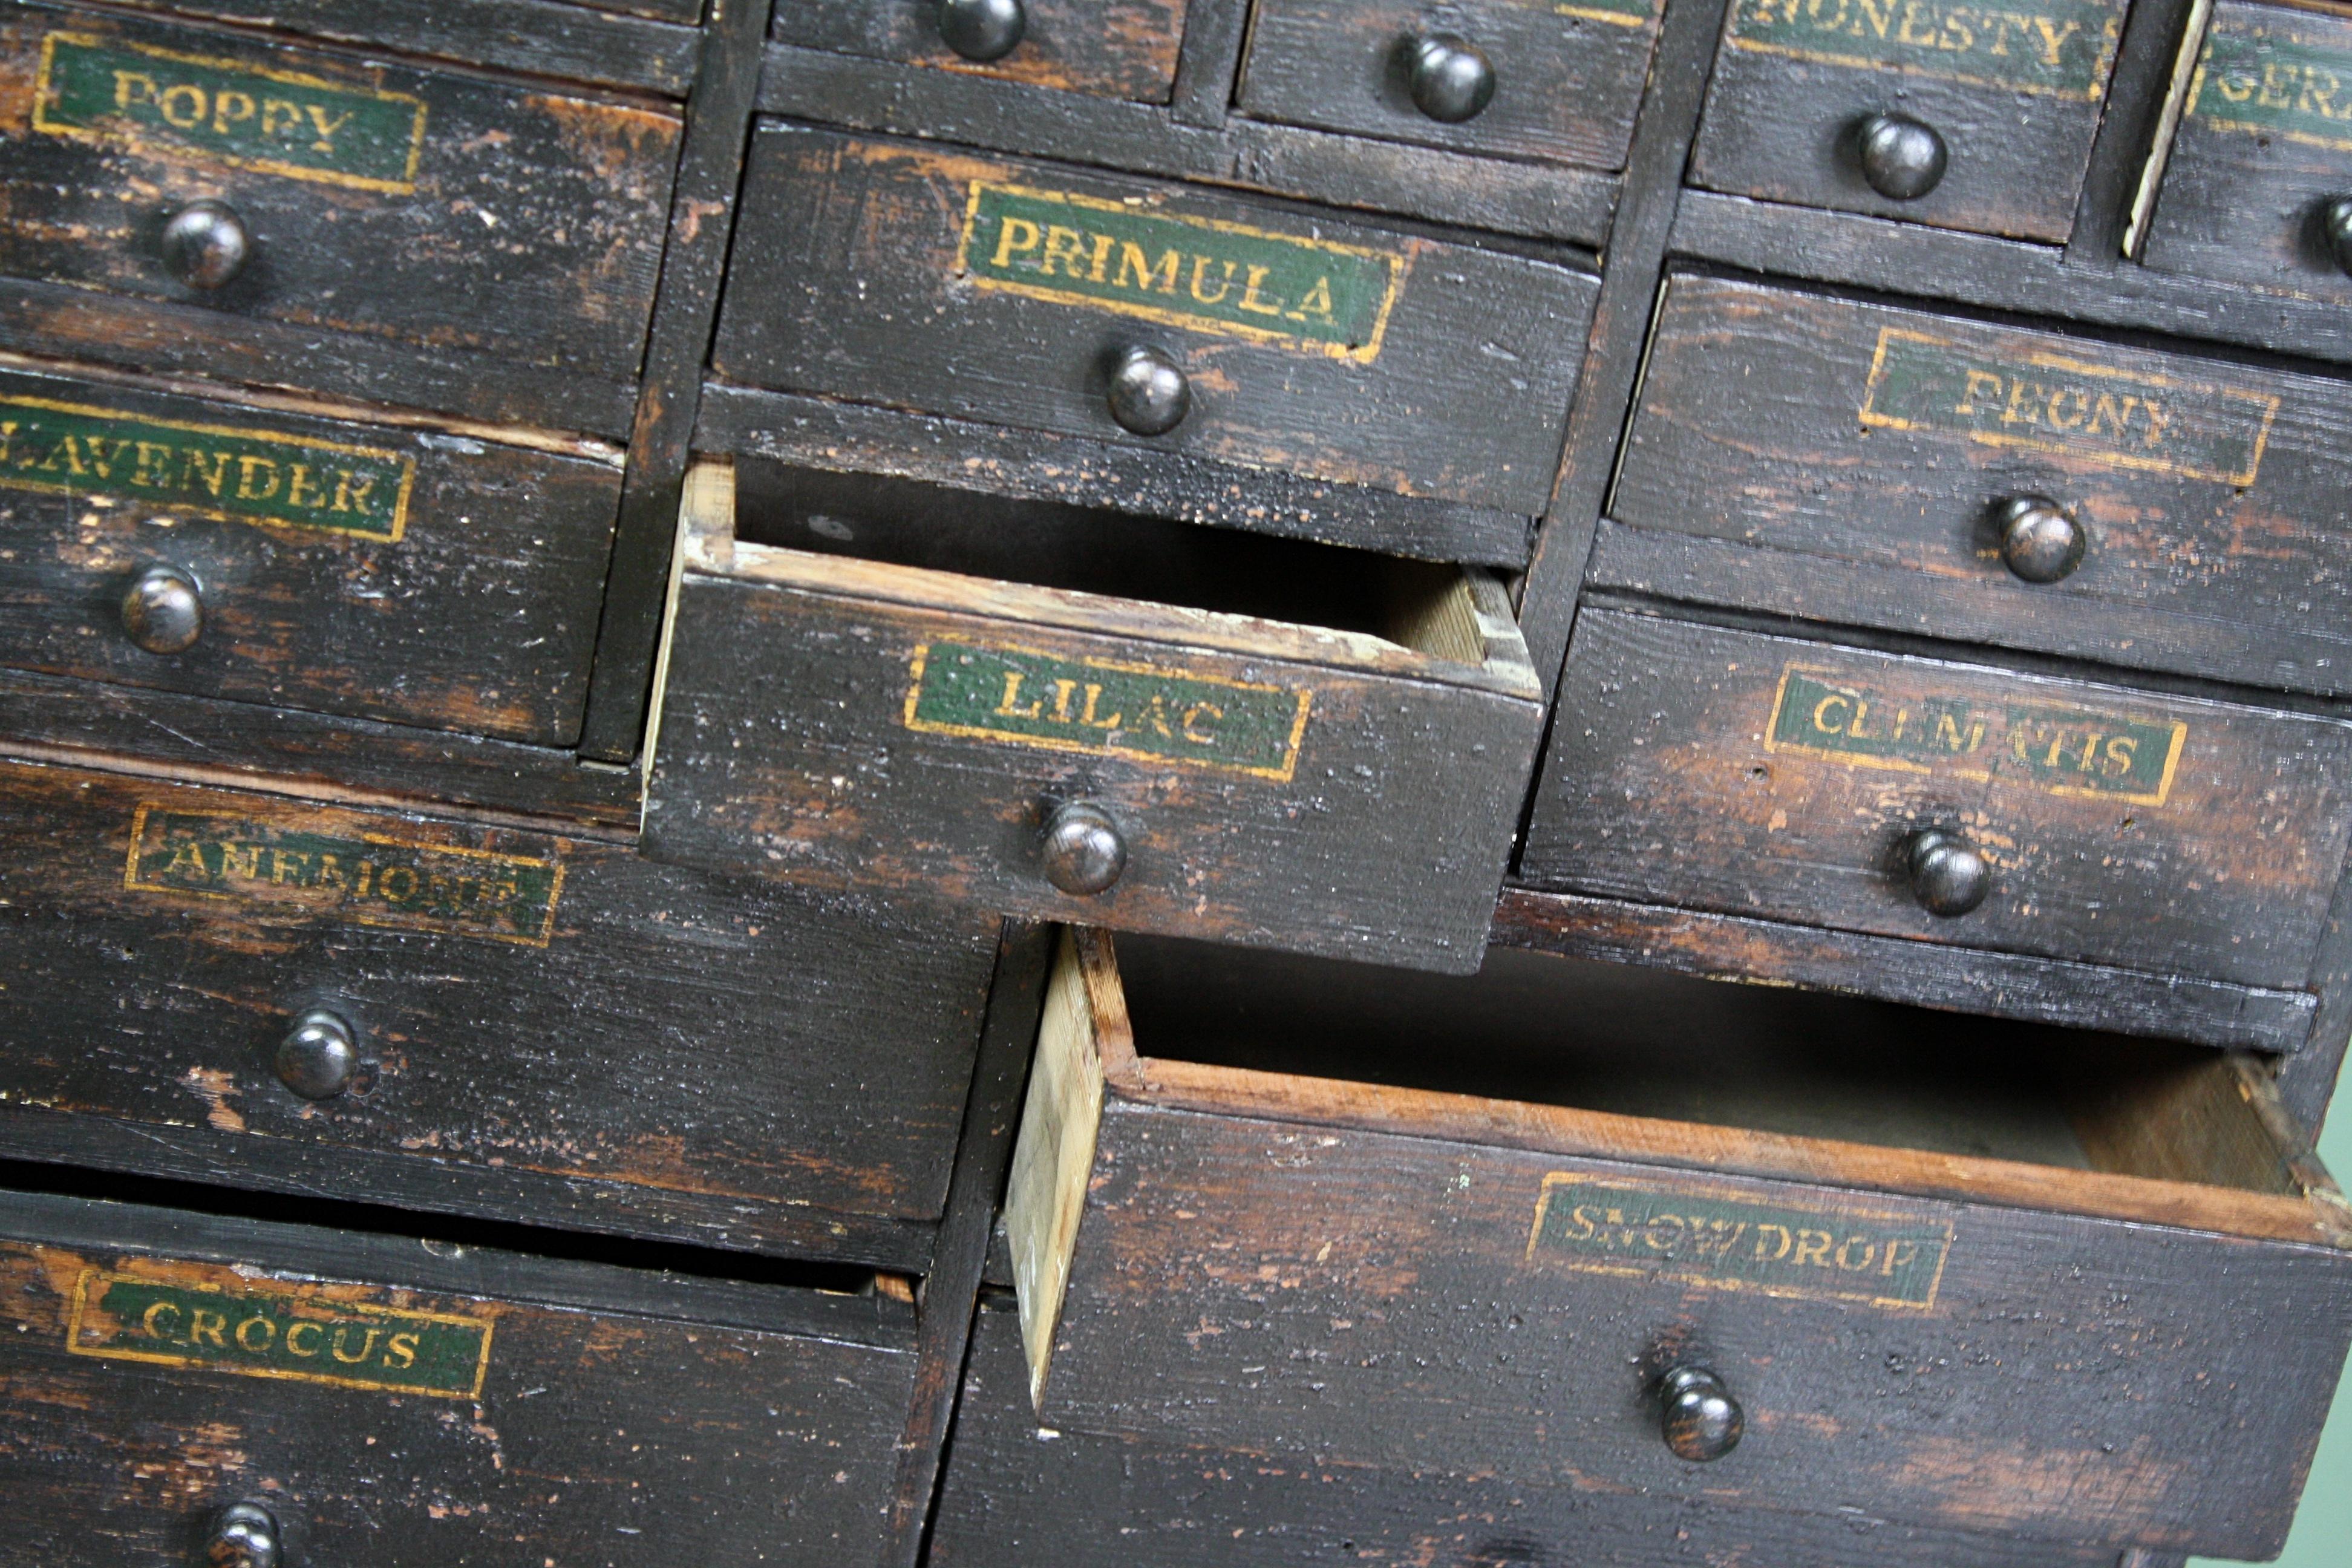 19th Century Horticulturalist Merchants Bank of Seed Shop Drawers 4